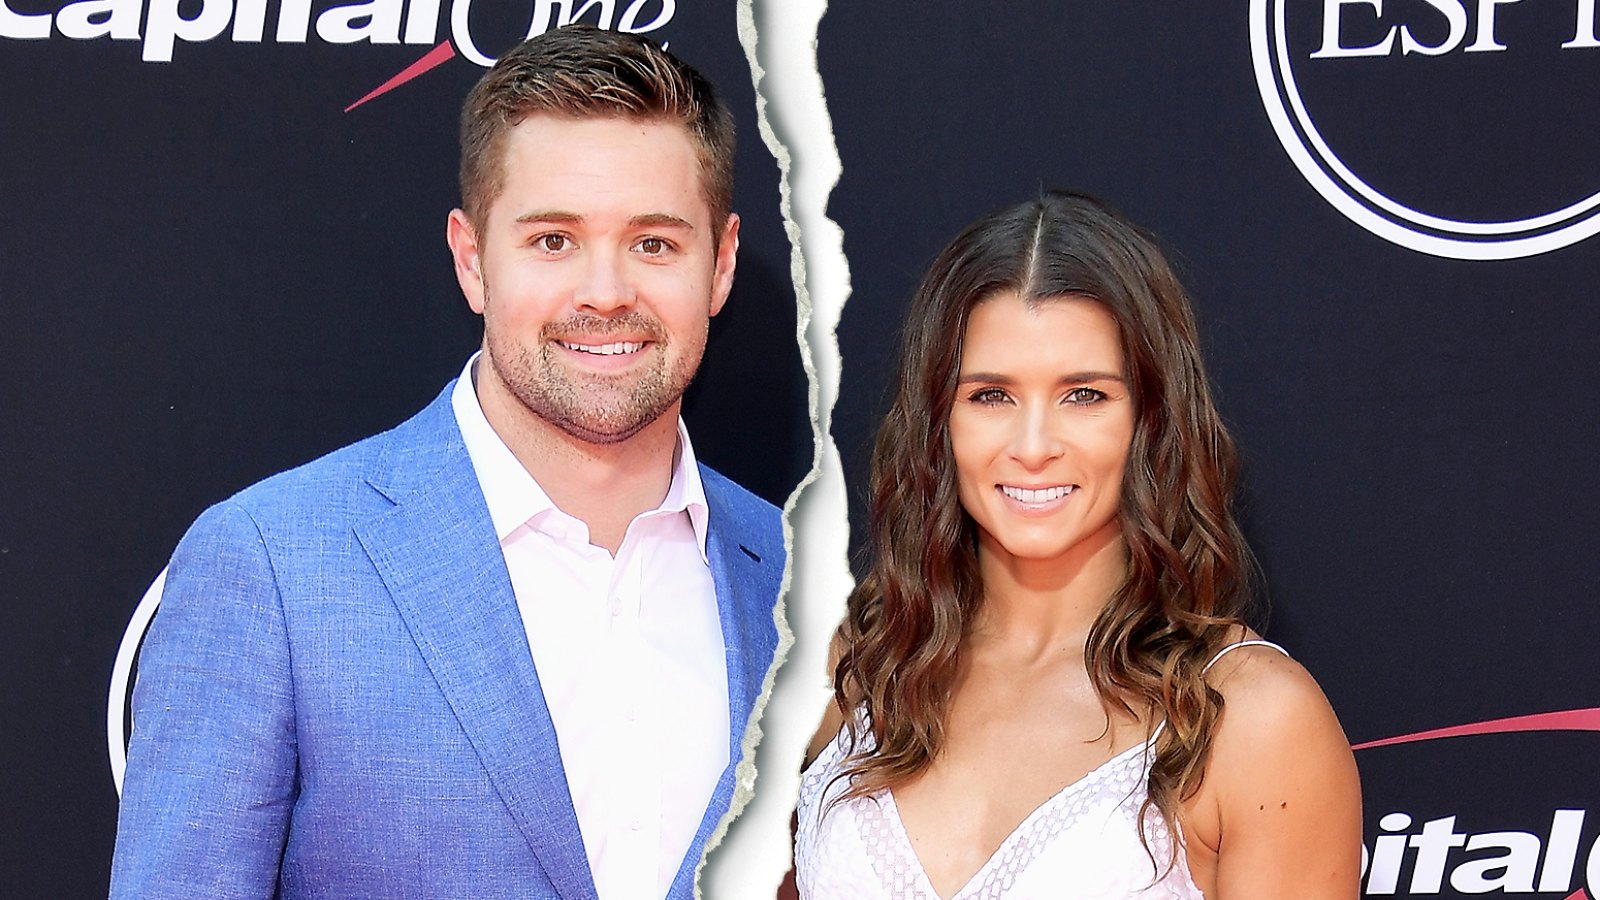 Danica Patrick and Ricky Stenhouse Jr. Break Up After Five Years